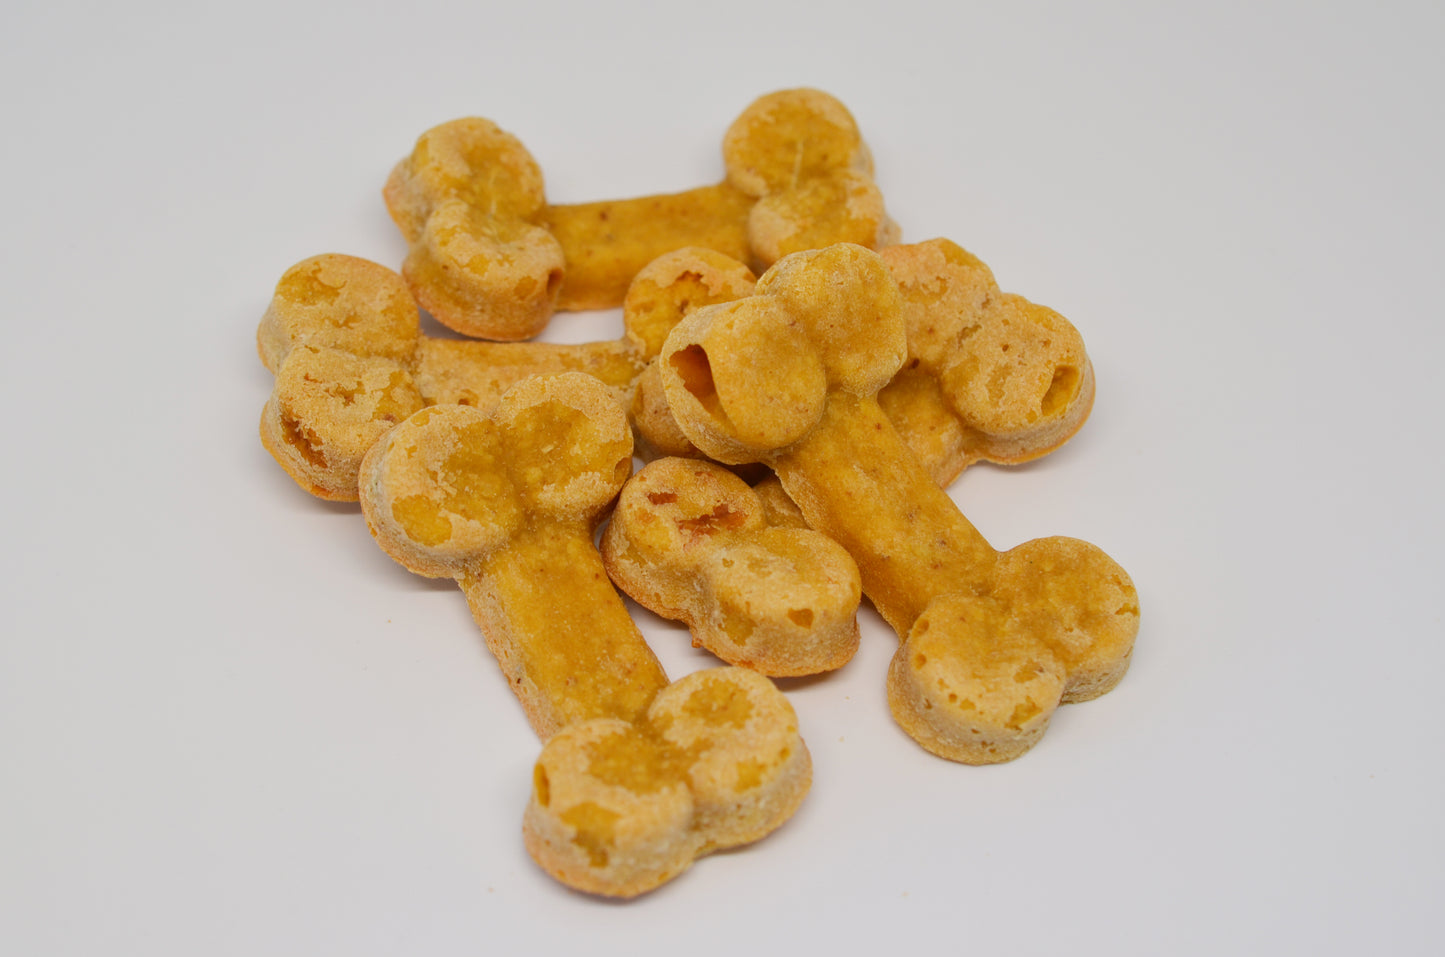 Waboose Snack Biscuit pet treats made with organic all natural Rabbit, chickpea flour and apple cider vinegar for your dogs. Free of Glycerine, Gluten, Grain & Preservatives.